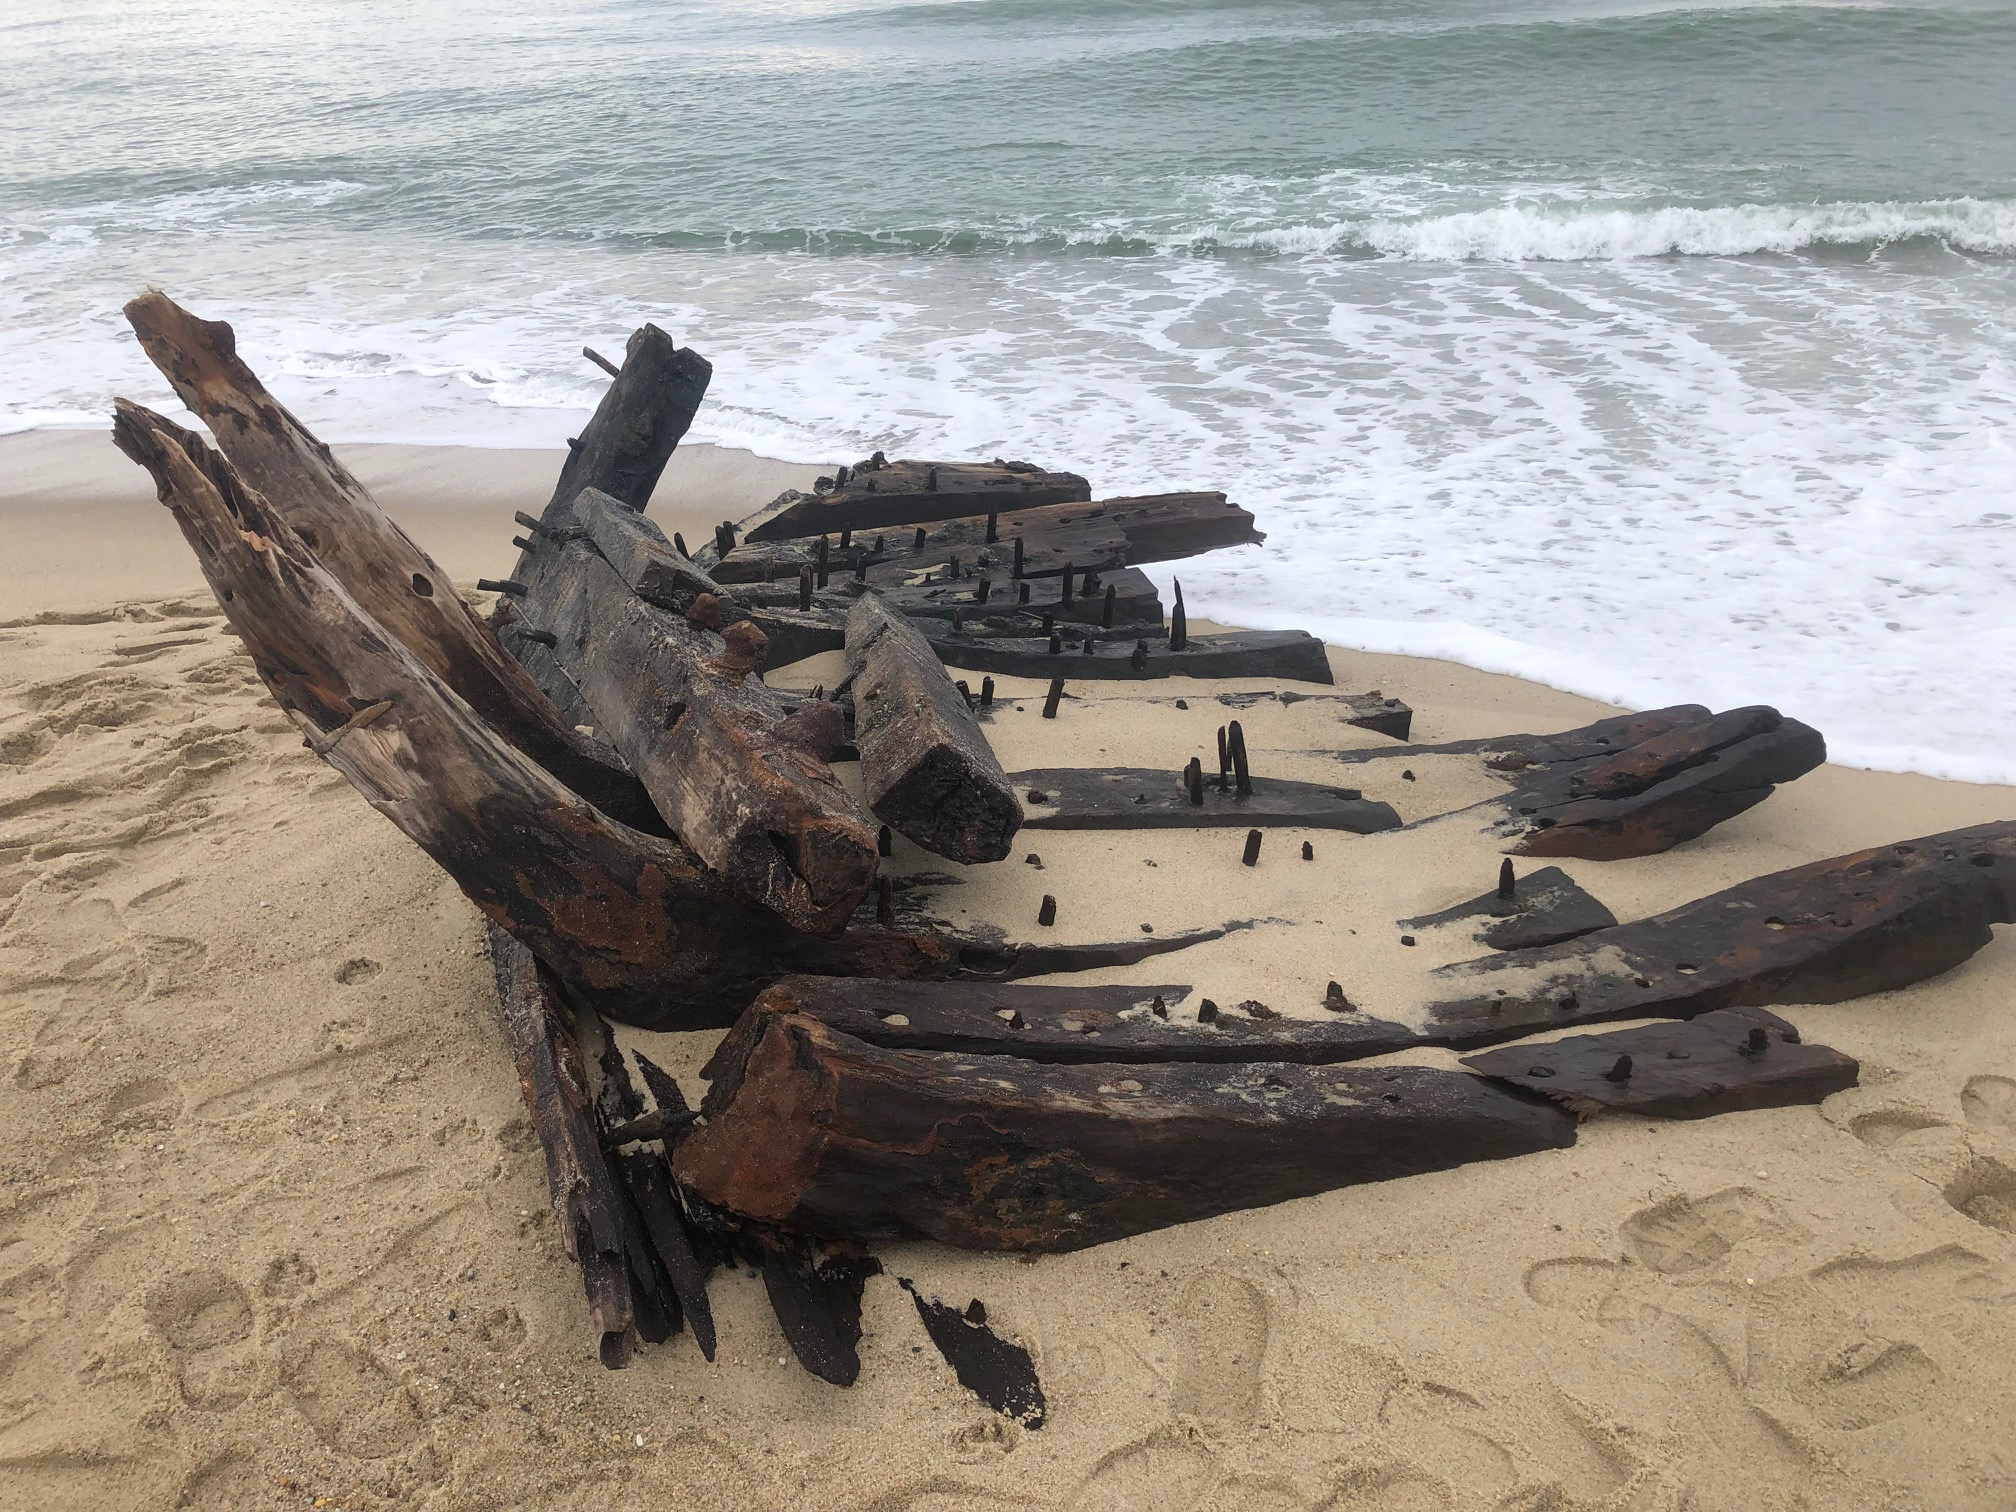 Shipwreck fragments were found on Nantucket. Here's what